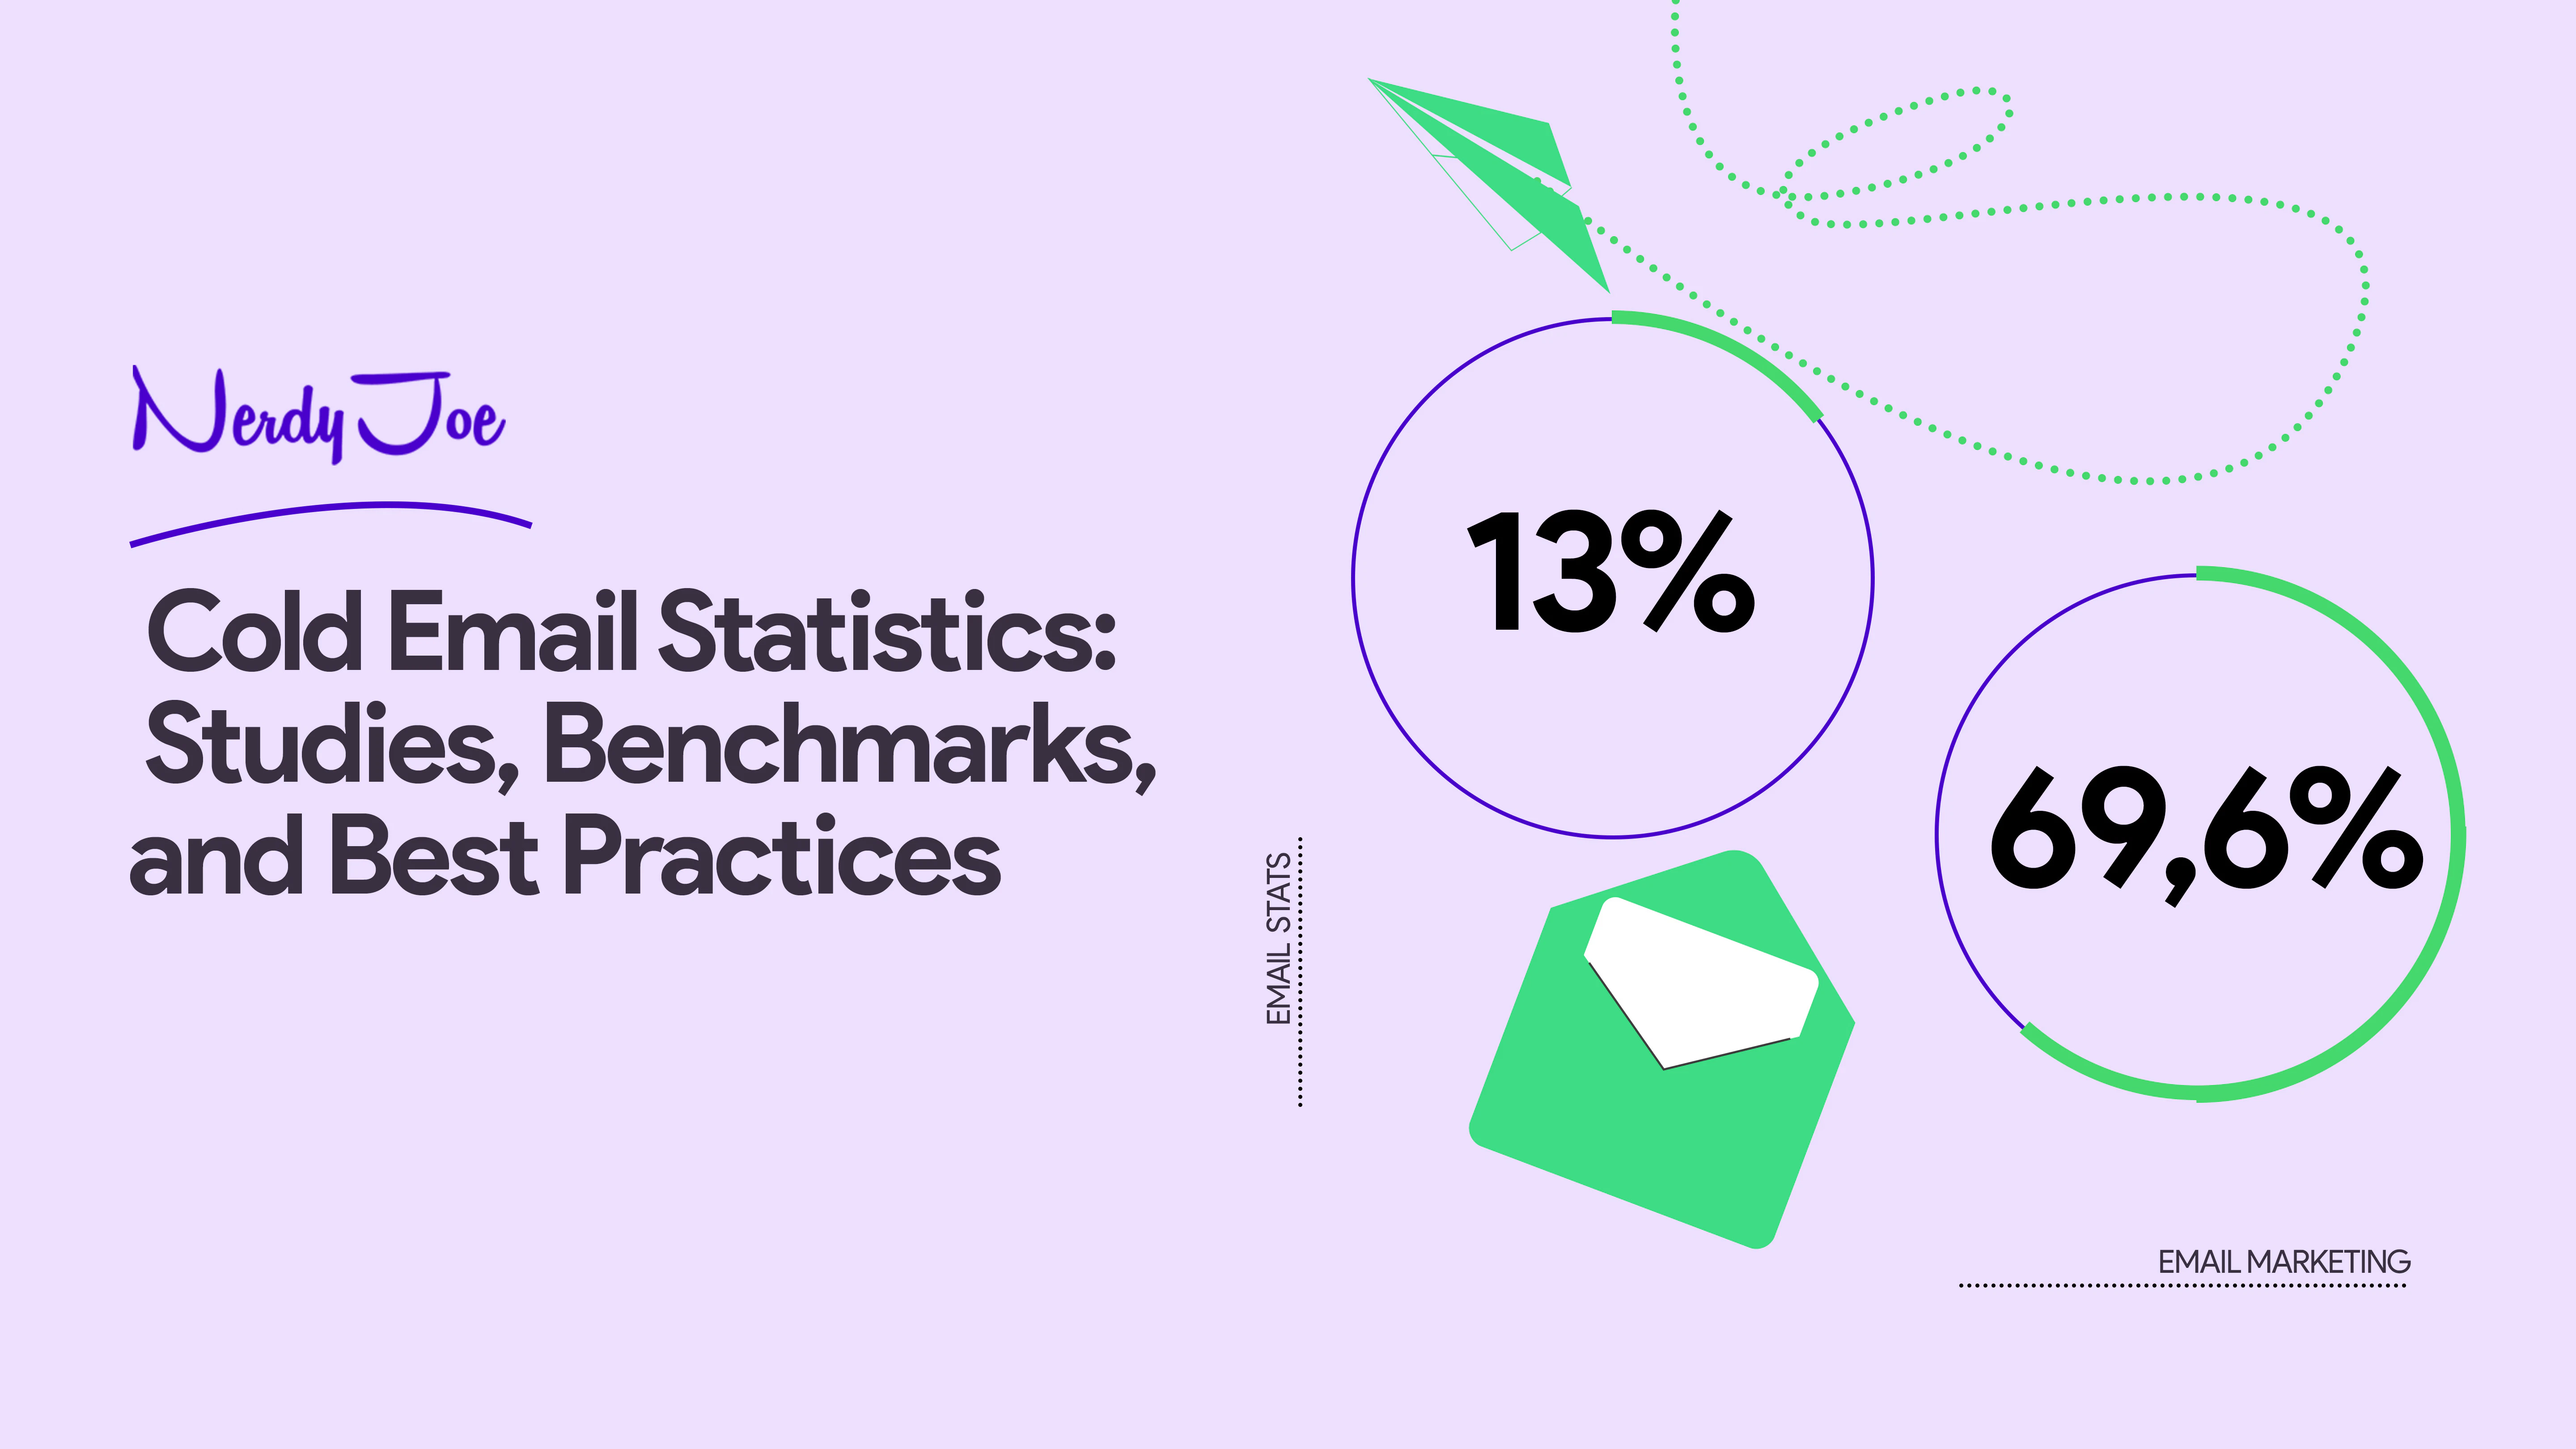 Cold Email Statistics: Studies, Benchmarks and Best Practices